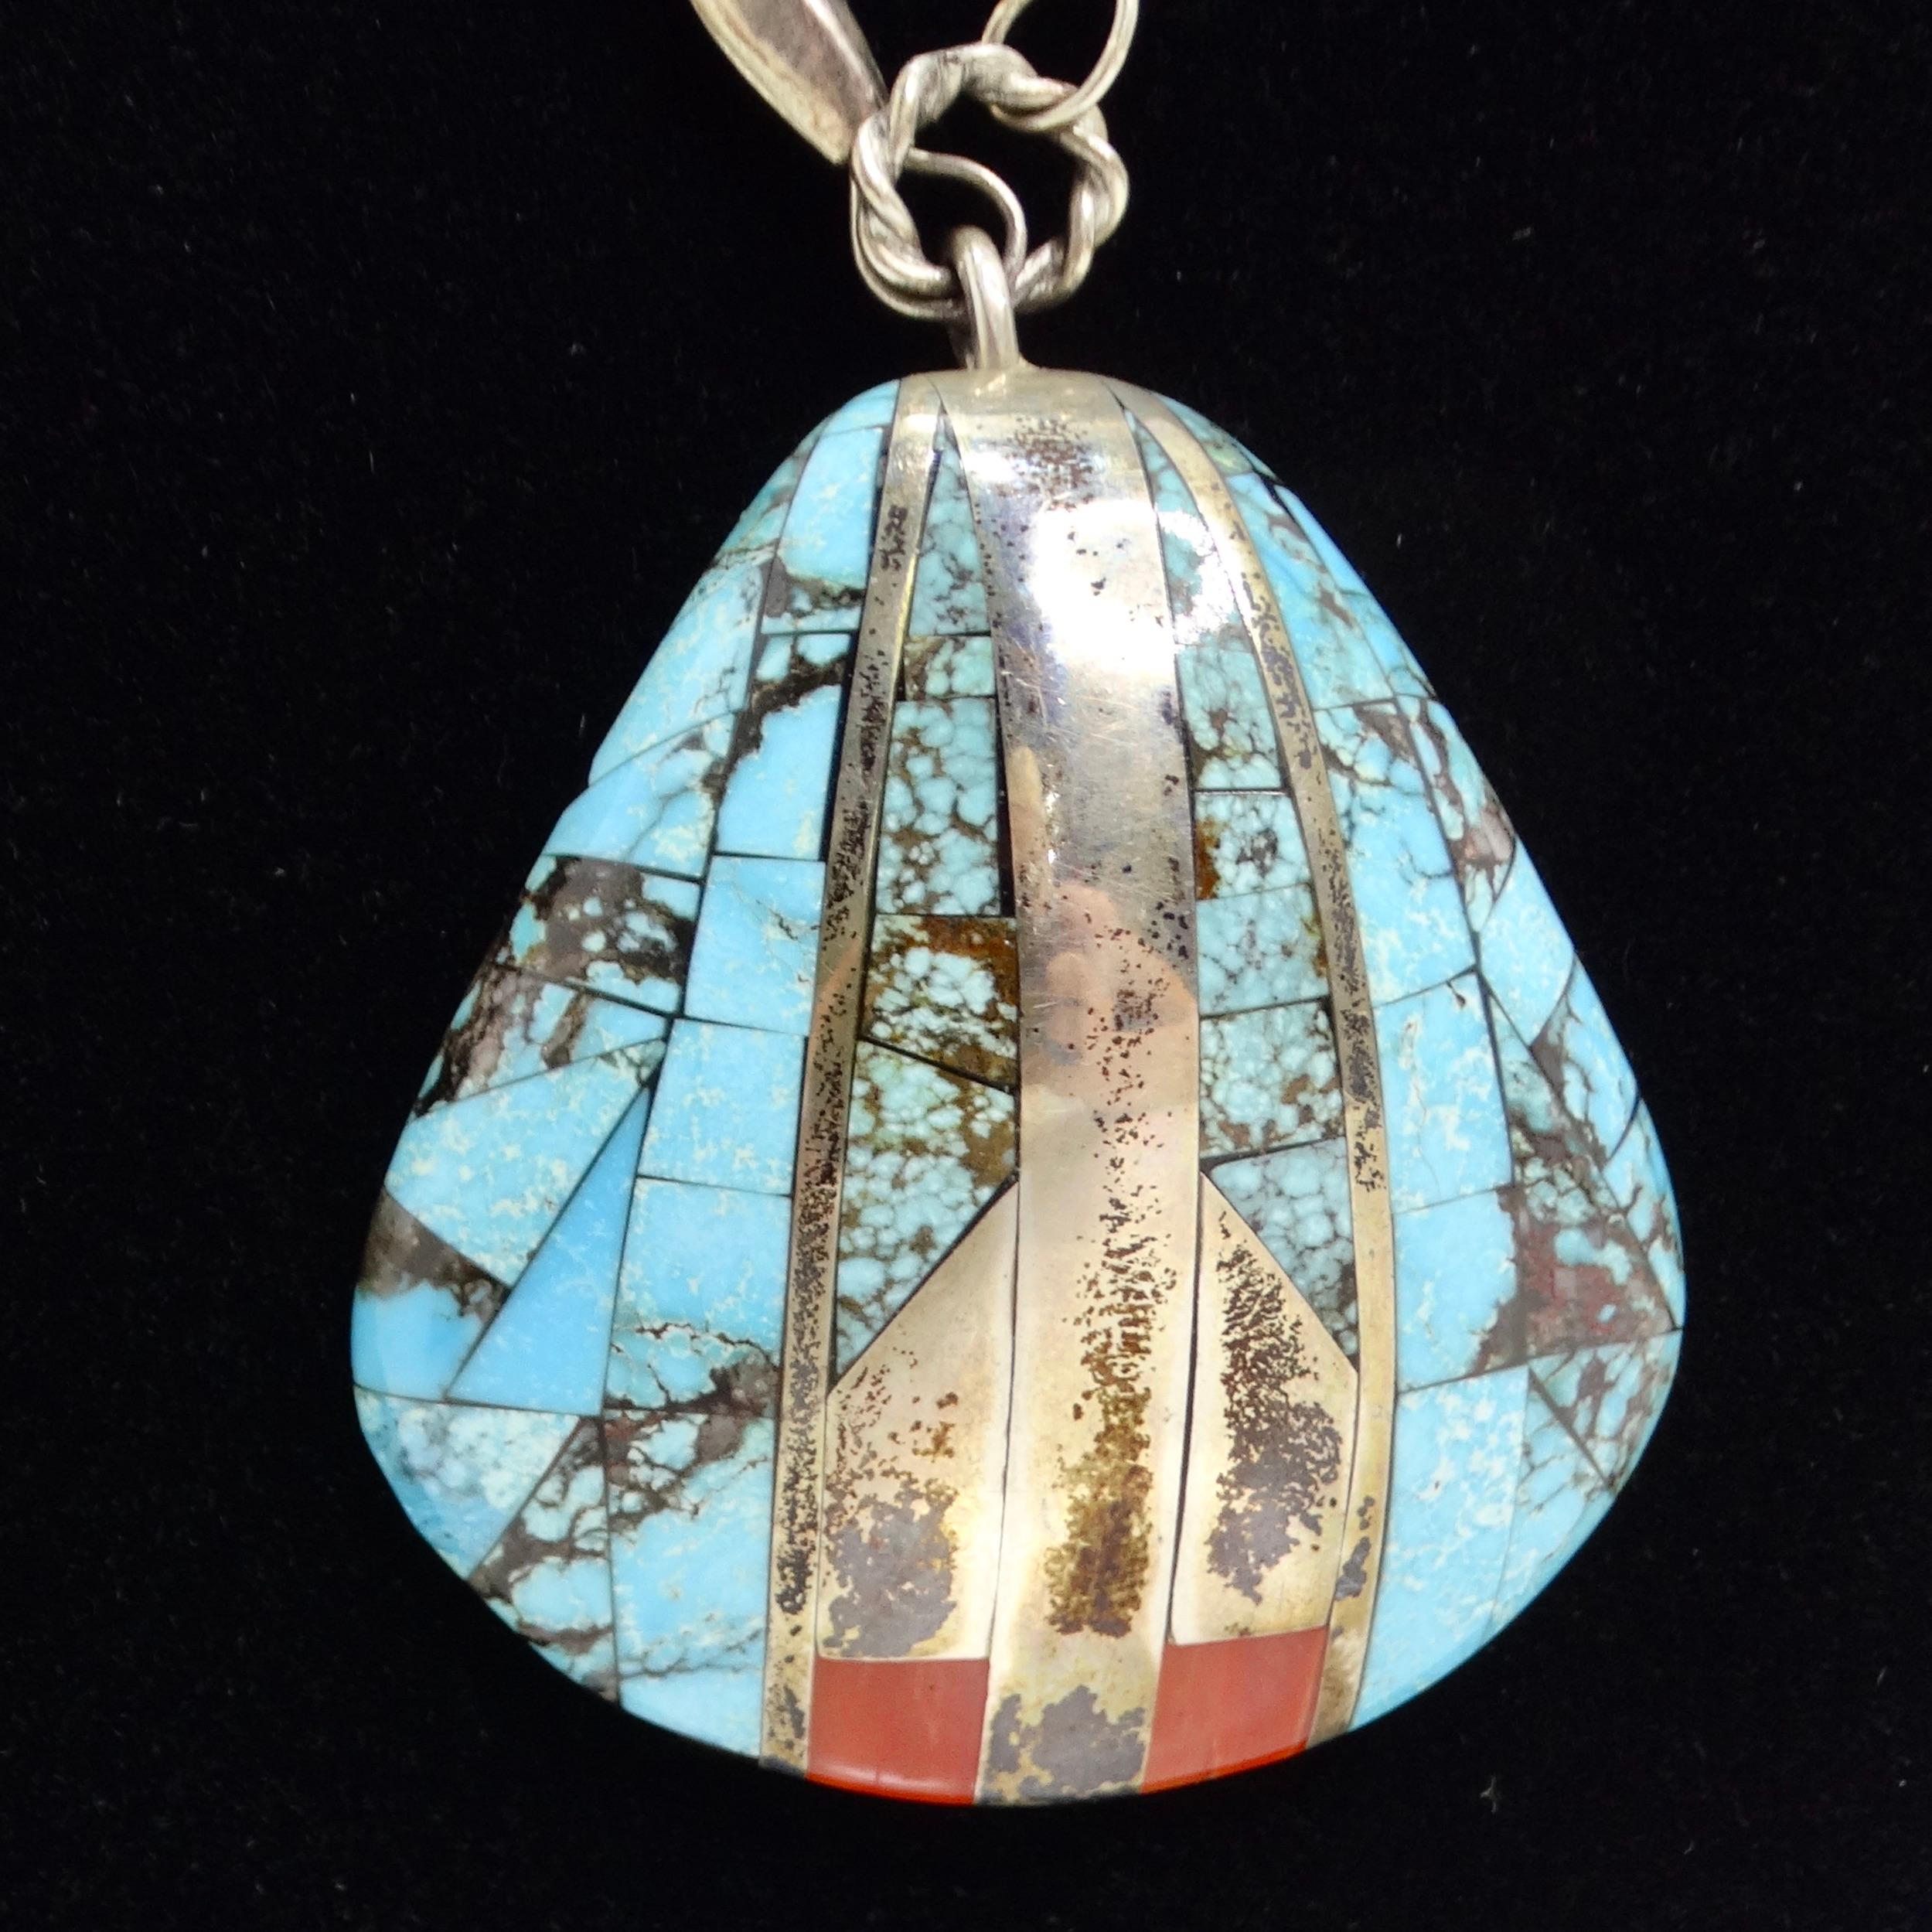 Introducing the Antique Saguaro Traders Turquoise Sea Shell Silver Pendant Necklace, a stunning Native American masterpiece that embodies the beauty and craftsmanship of traditional jewelry. This incredible statement necklace features a pure silver